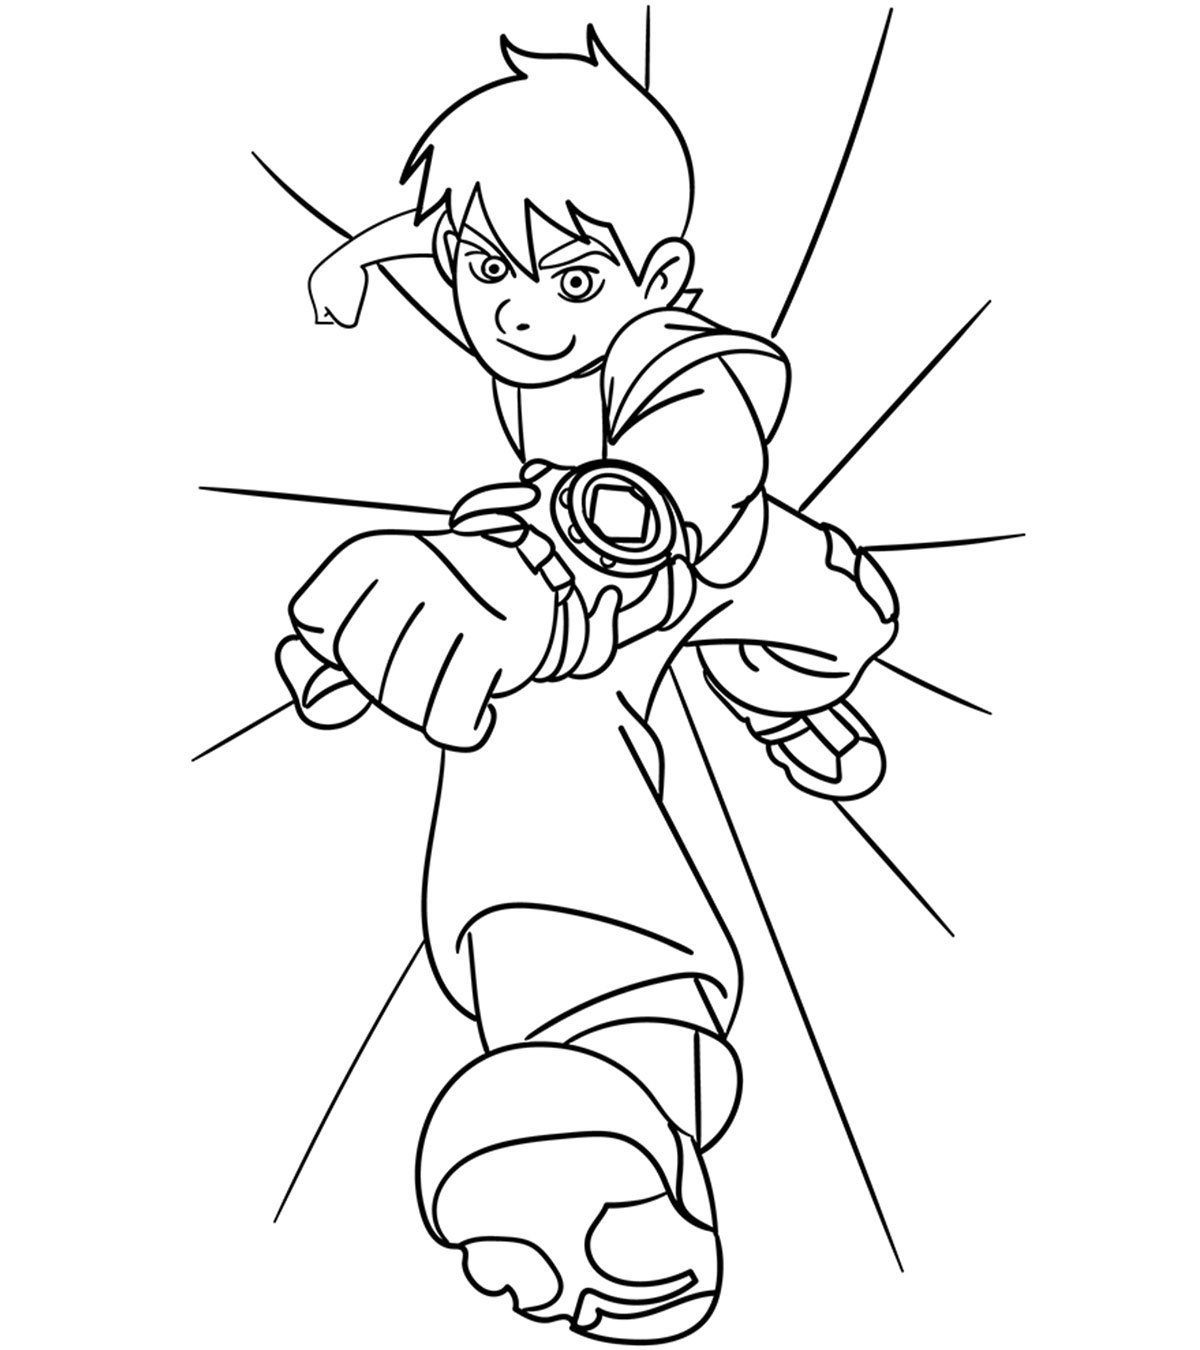 Ben 10 Coloring Pages For Kids : For Kids Ben 10 Coloring Pages - Free